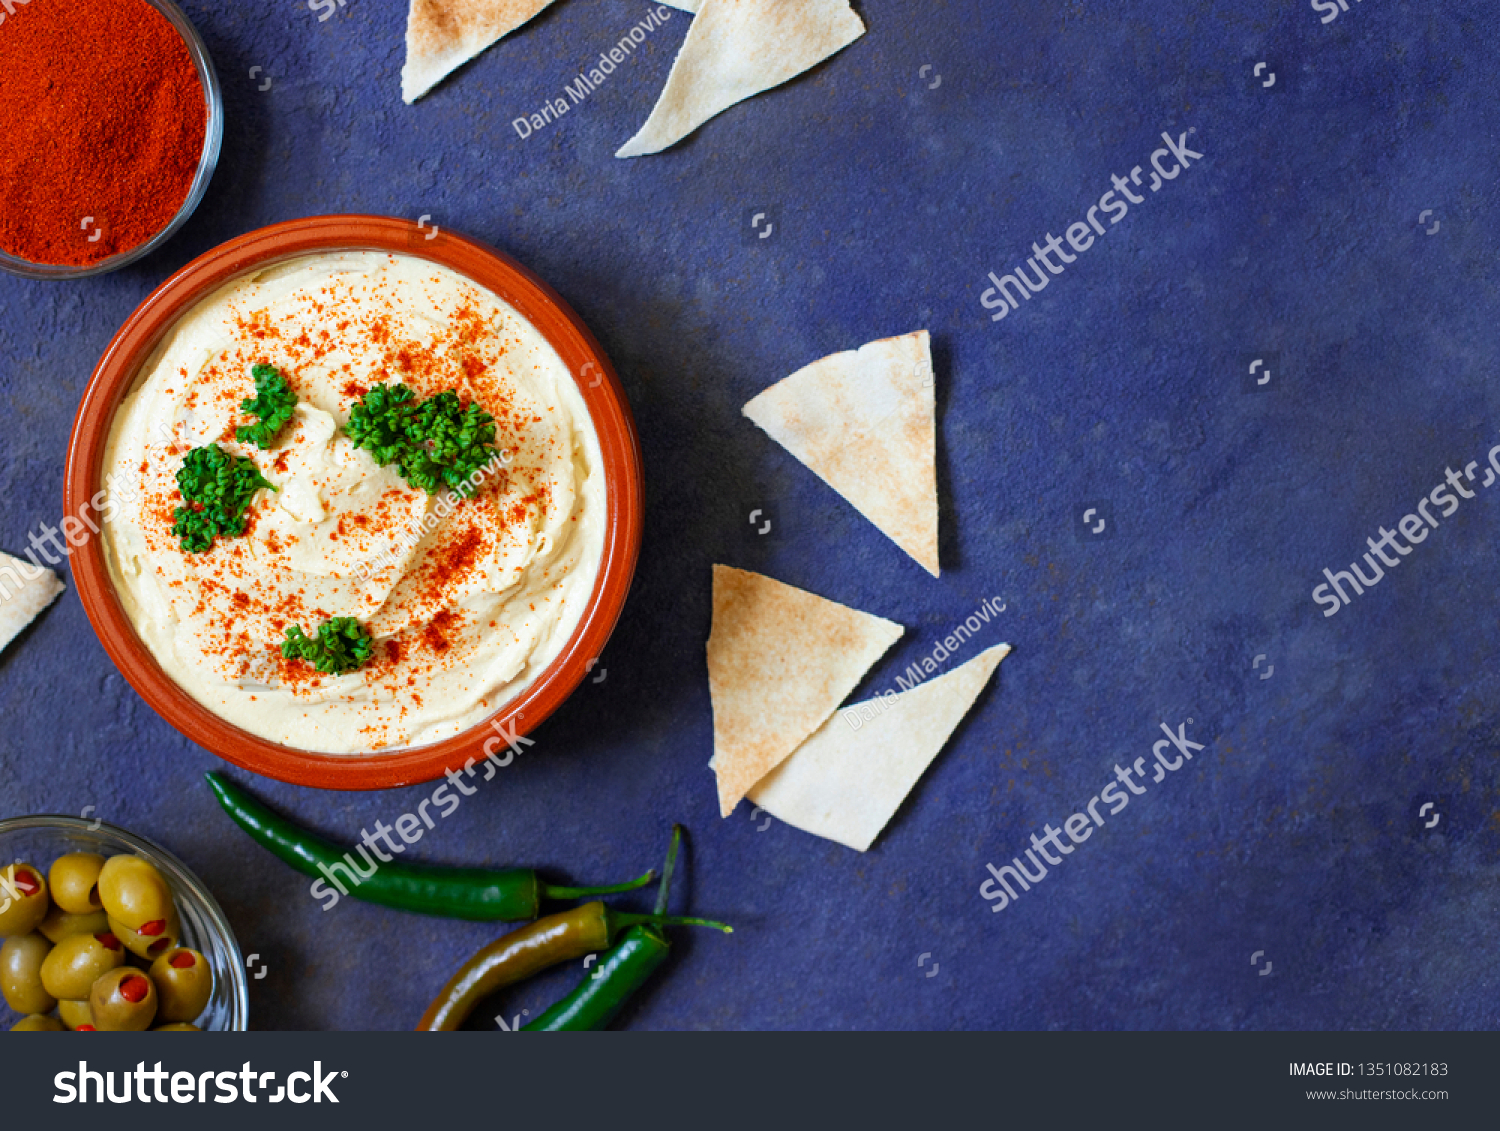 Healthy homemade hummus served with paprika powder, pita bread, olives and parsley. Middle Eastern cuisine, Israeli cuisine, Levanese cuisine, Levantine cuisine. Dark background. Top view #1351082183